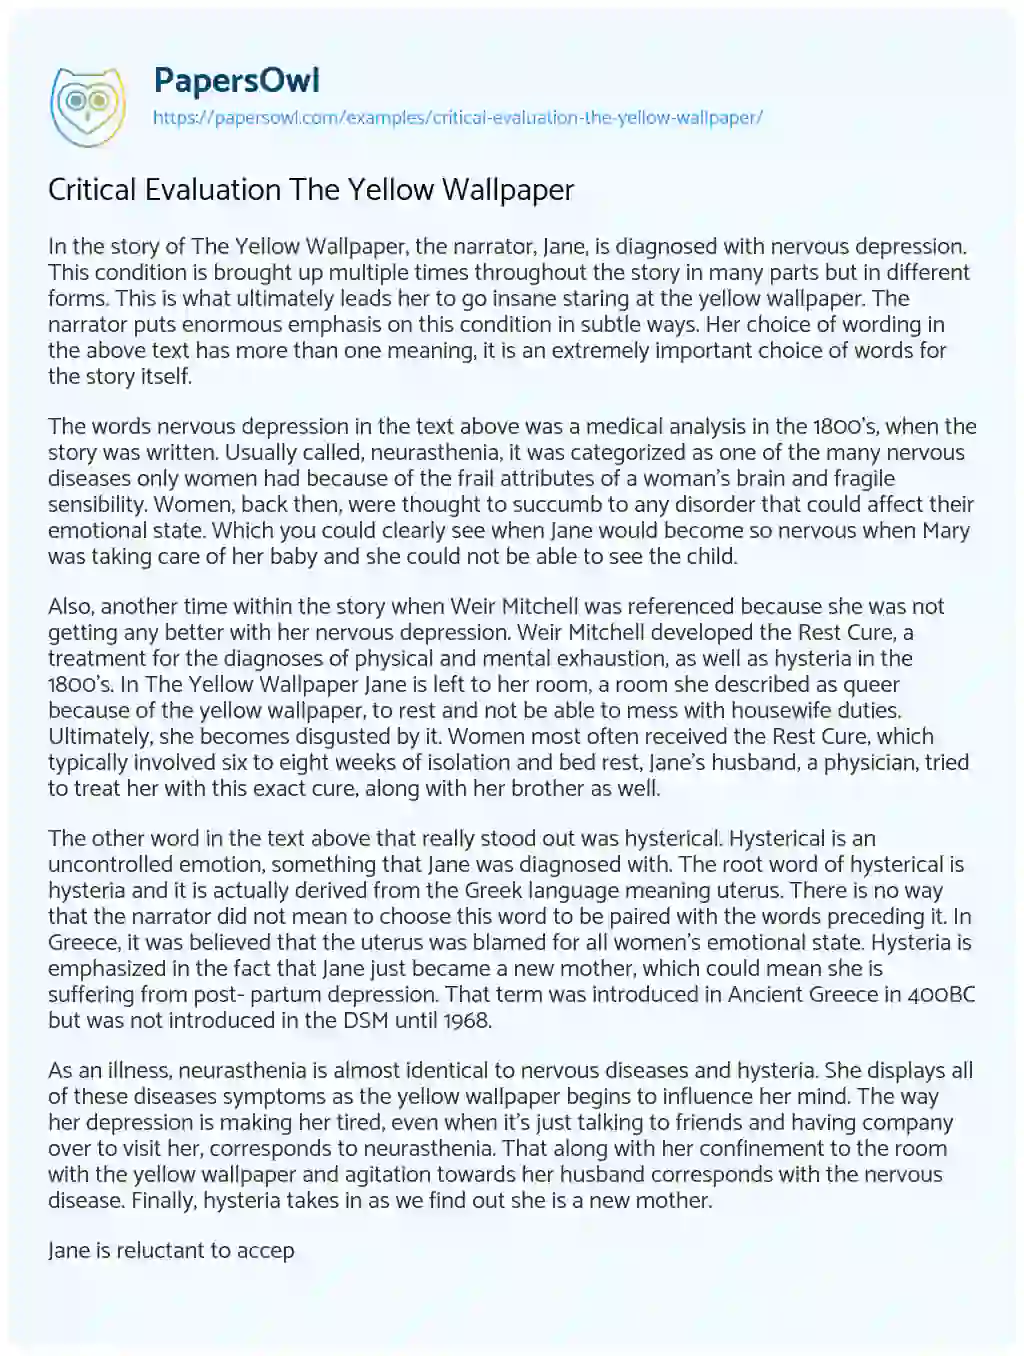 Essay on Critical Evaluation the Yellow Wallpaper